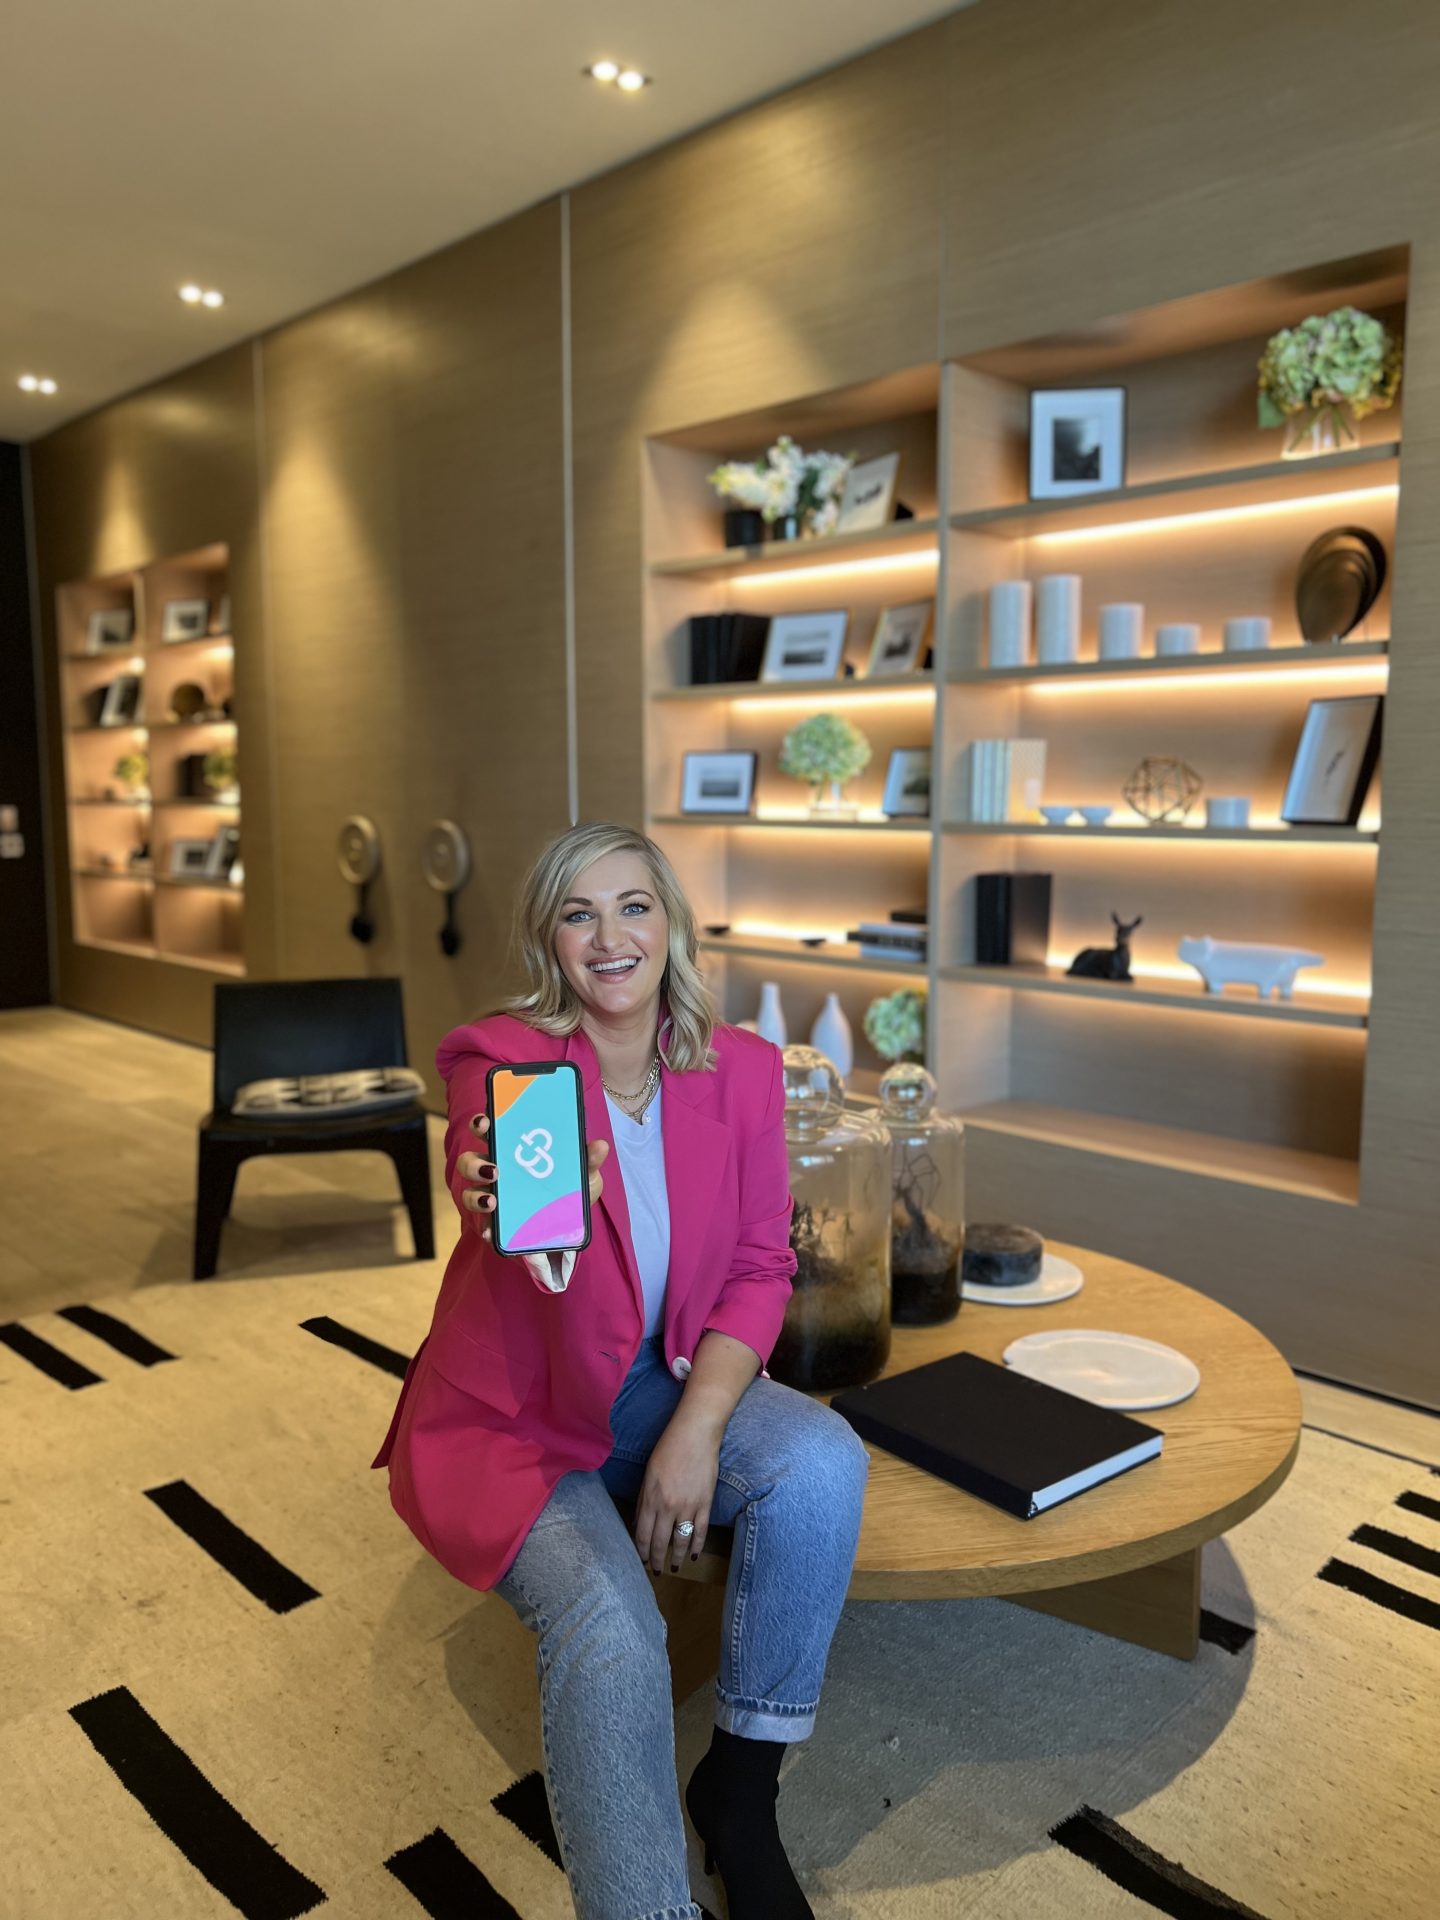 Elaine Murphy Doheny is targeting the work-from-home generation with her wellness and beauty app